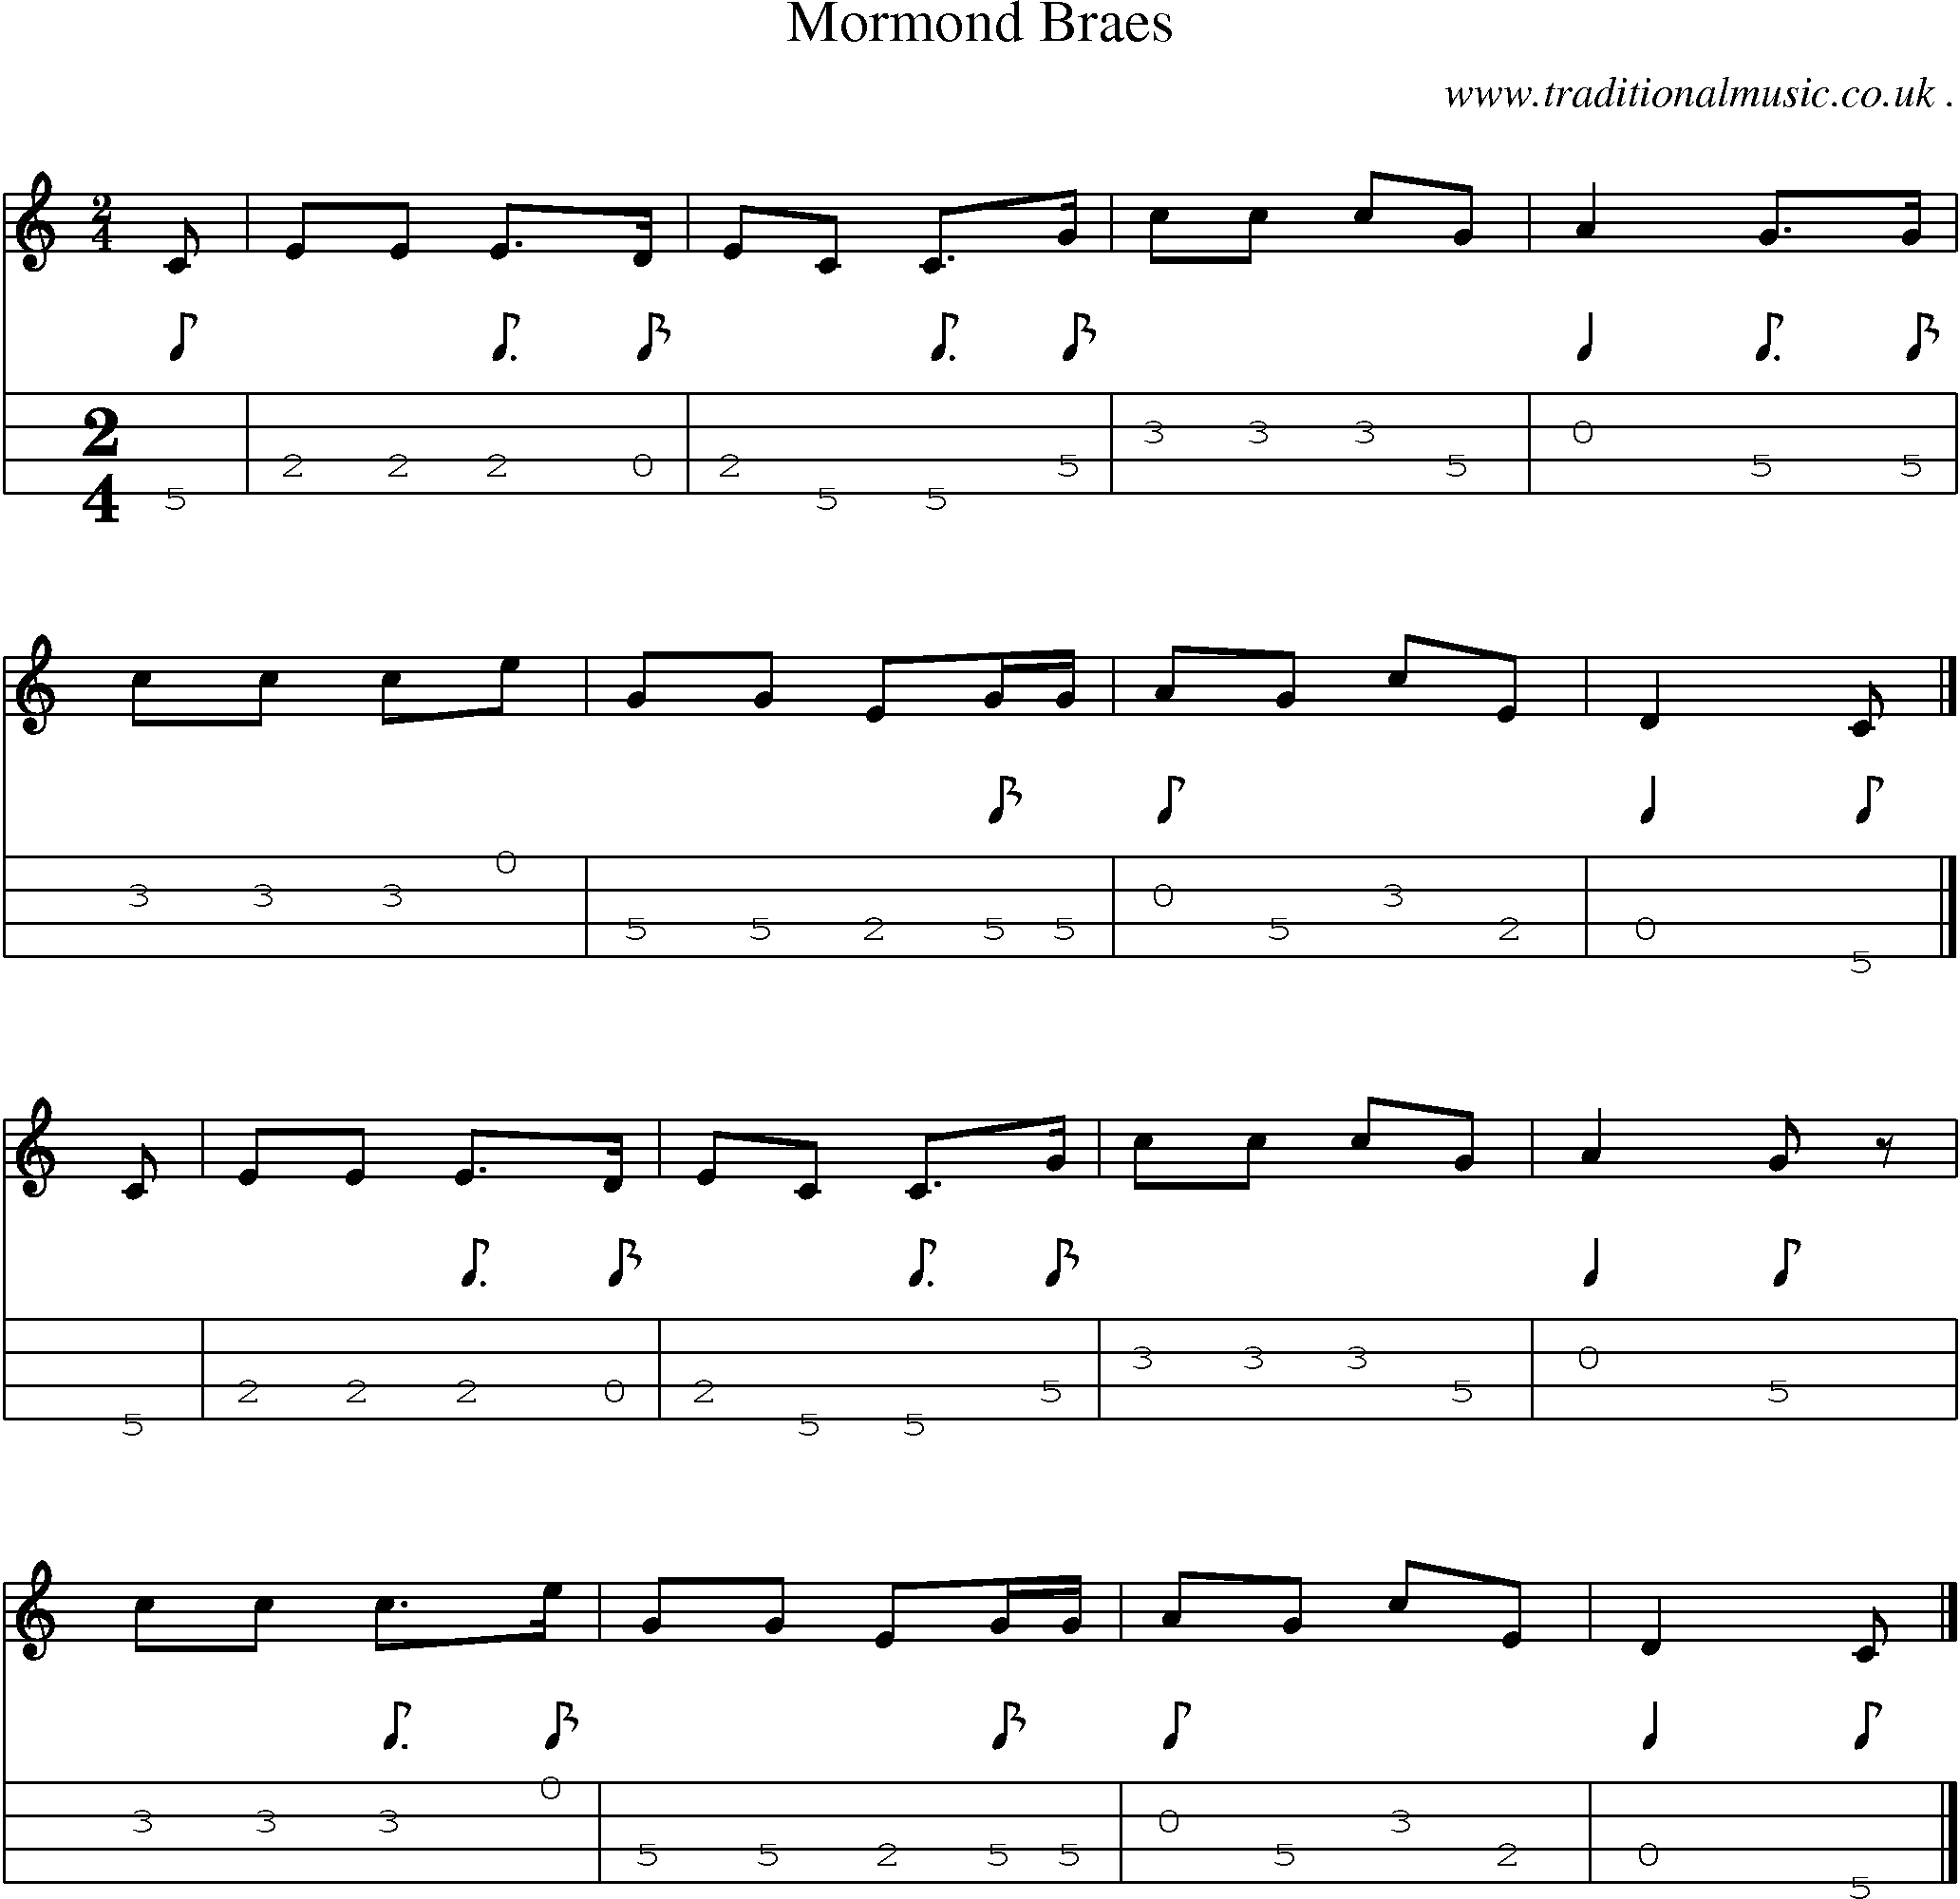 Sheet-music  score, Chords and Mandolin Tabs for Mormond Braes